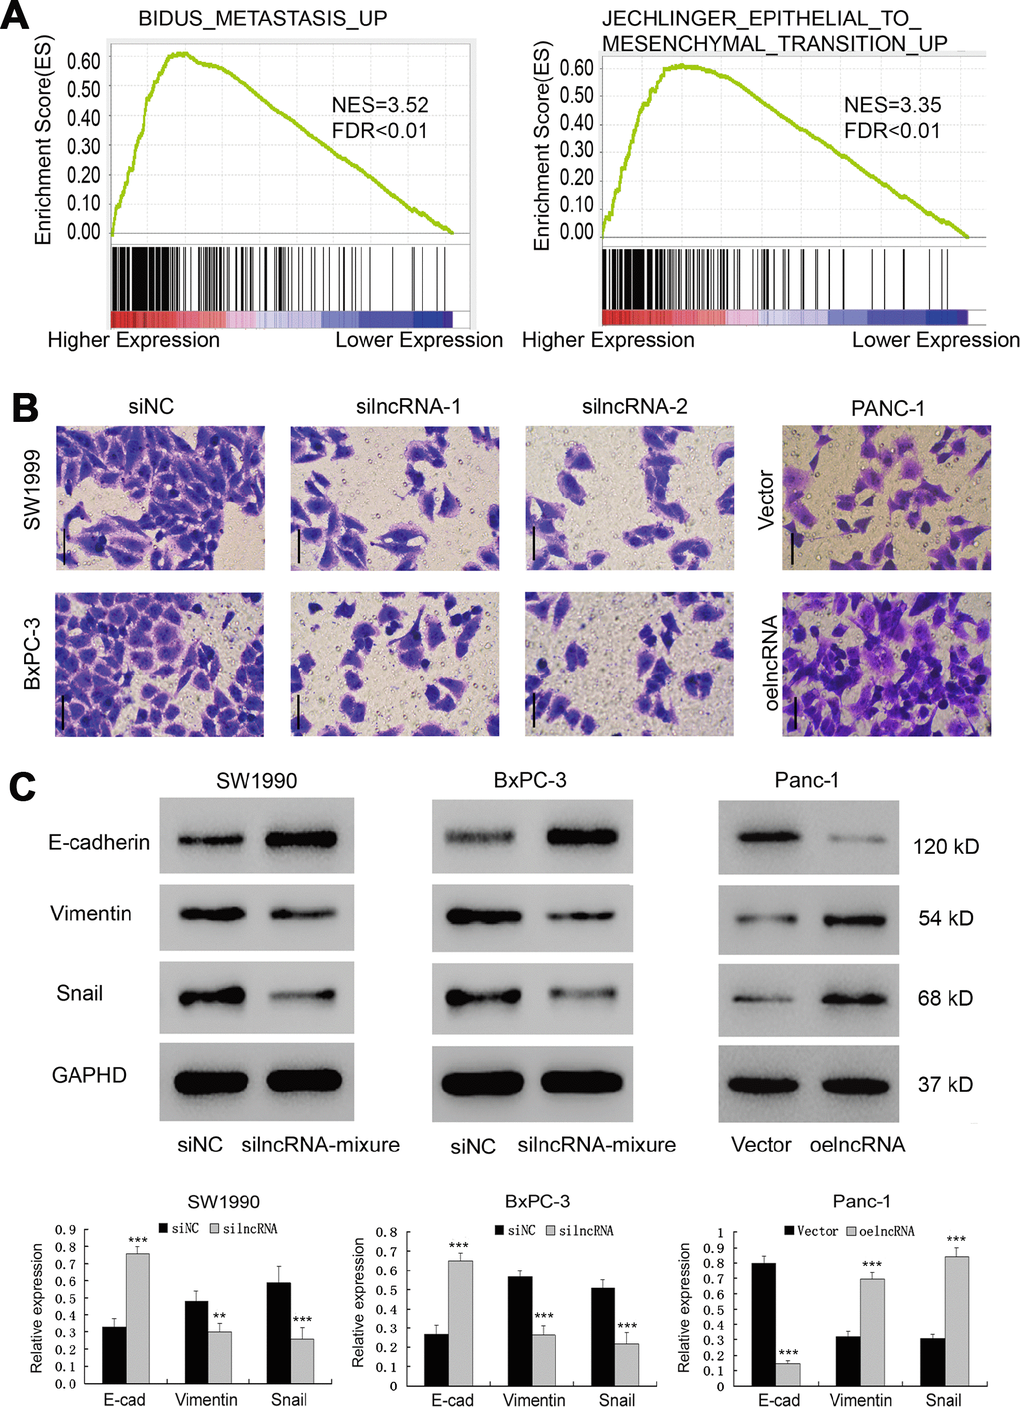 ENSG00000254041.1 drives Epithelial-Mesenchymal Transition (EMT). (A) GSEA analysis revealed that ENSG00000254041.1 expression associated with the EMT pathway. (B) Decreased expression of ENSG00000254041.1 in SW1990 and BxPC-3 cells significantly reduced their invasive capacity, while overexpression of ENSG00000254041.1 promoted Panc-1 cells invasion, as measured by a transwell assay. (C) Western blot analysis confirmed that a set of EMT-related proteins was affected by ENSG00000254041.1. Three samples in each group. **p p 